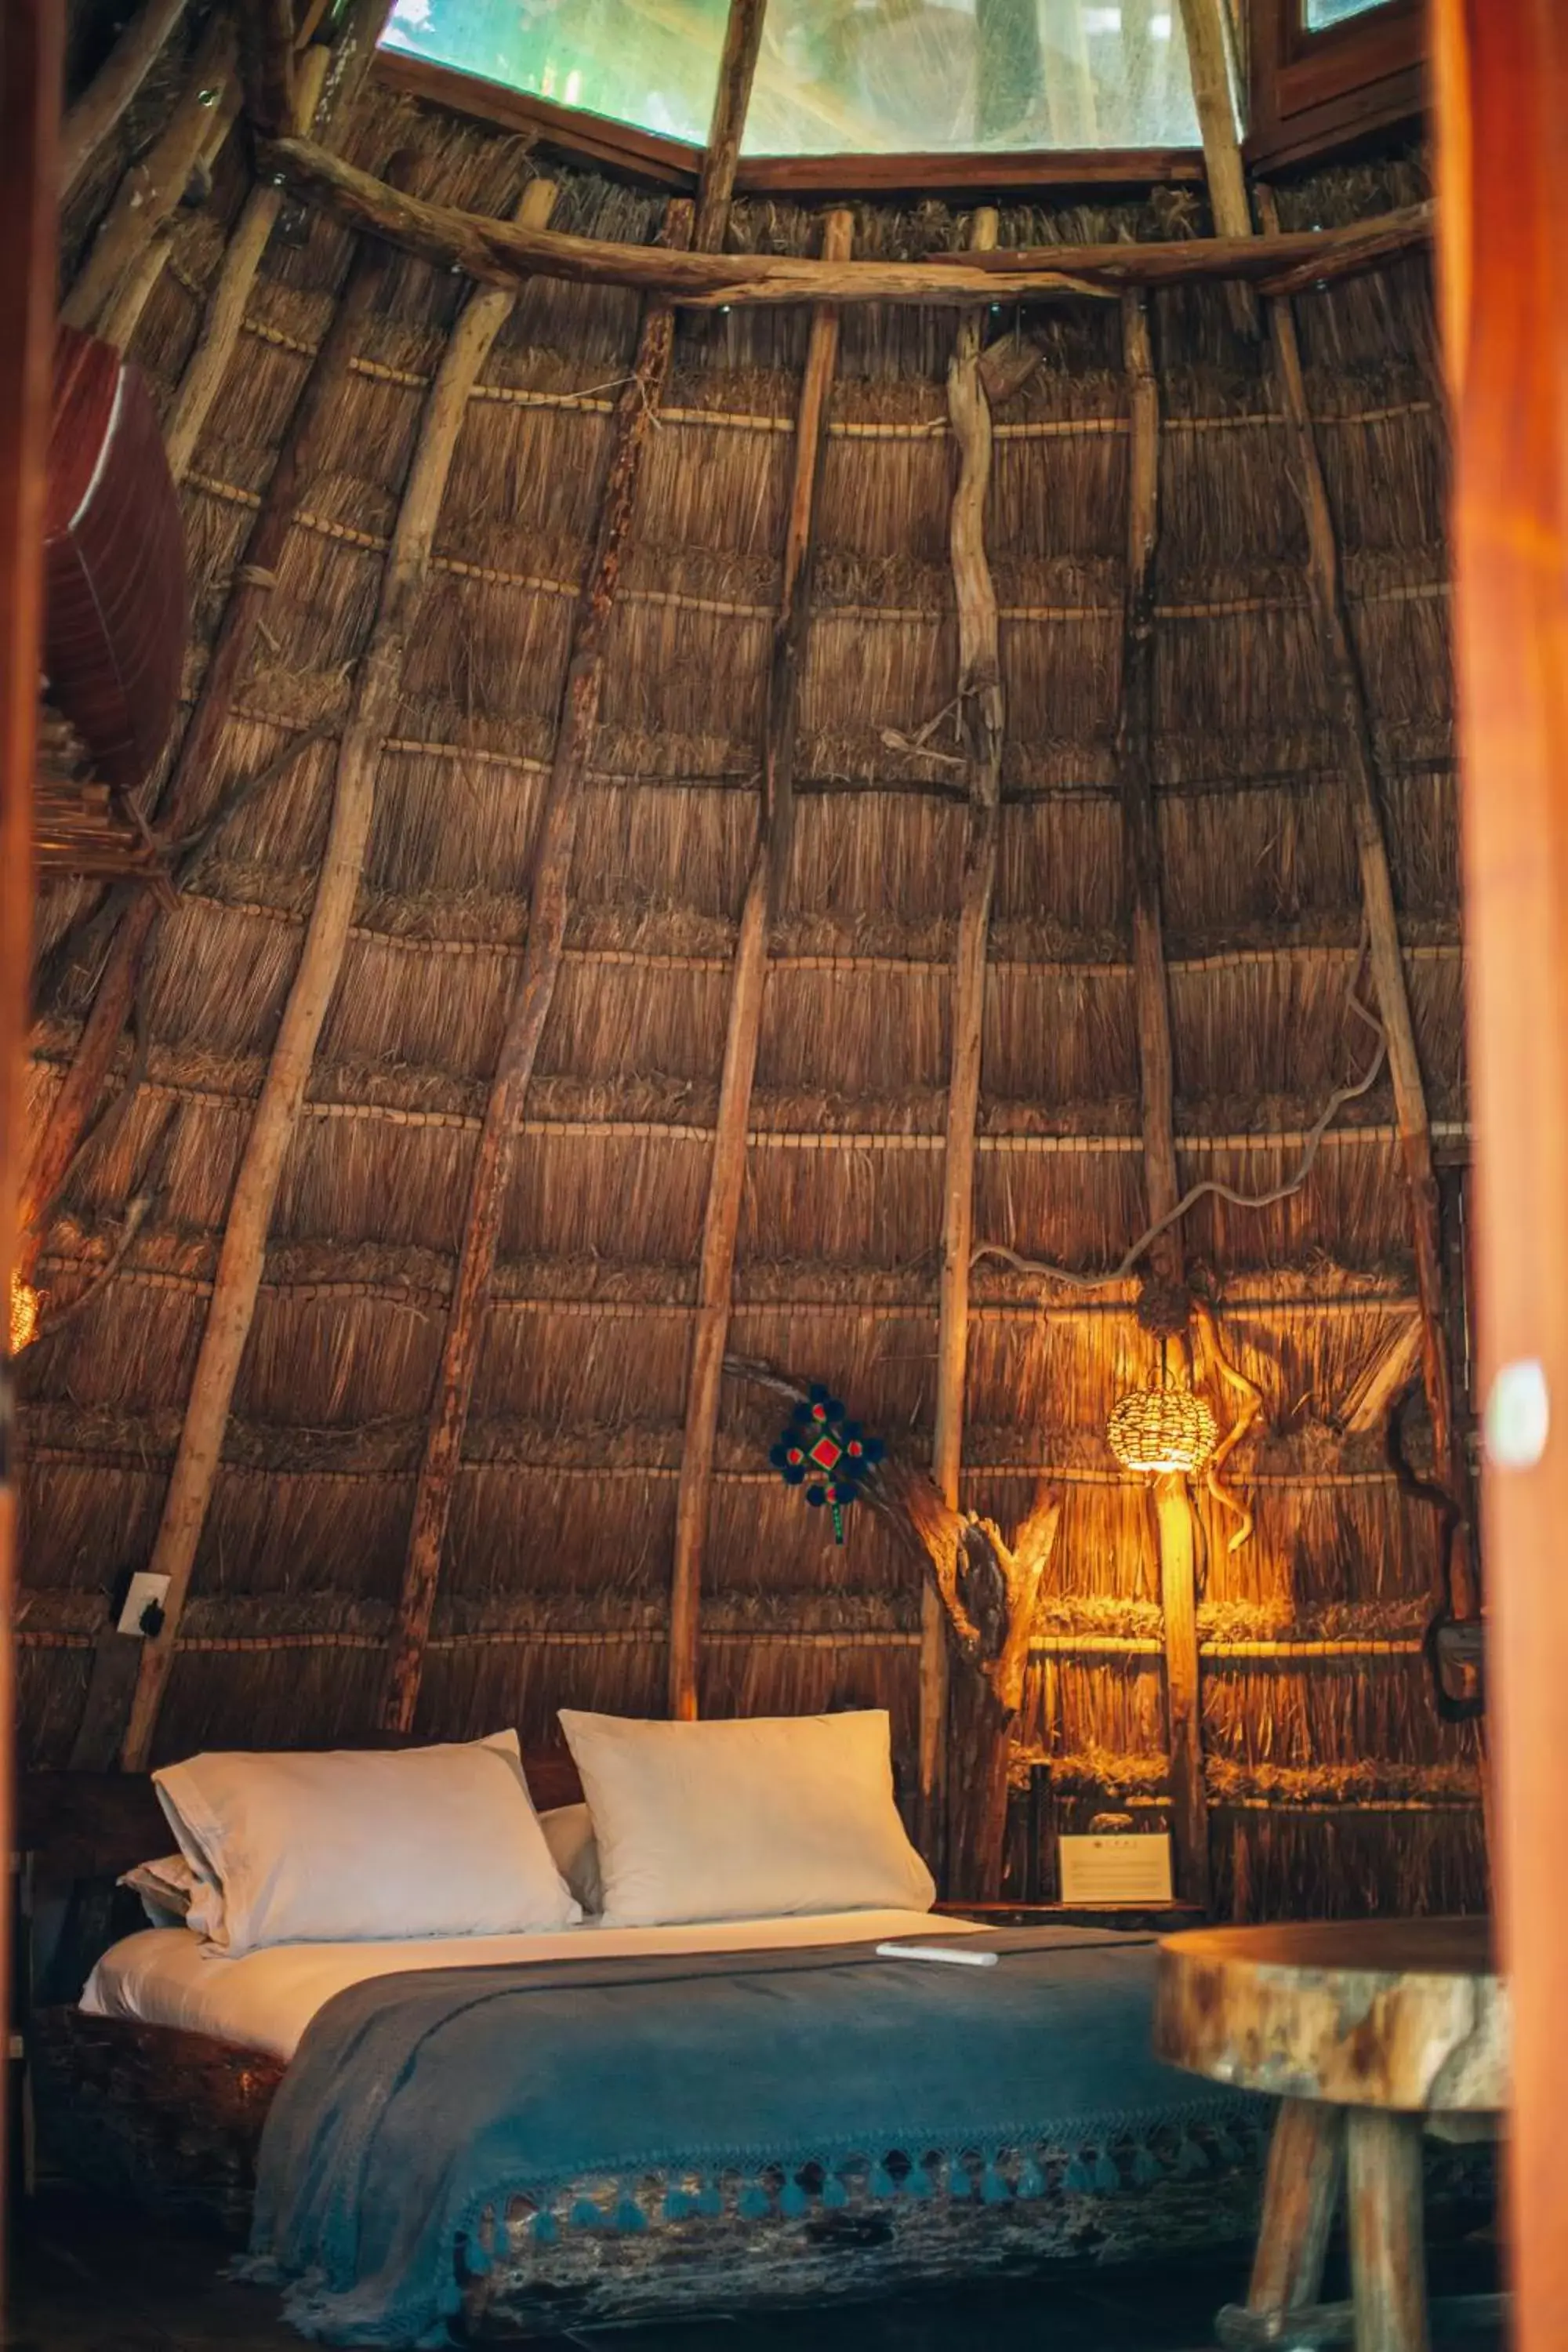 Bed in Ikal Tulum Hotel